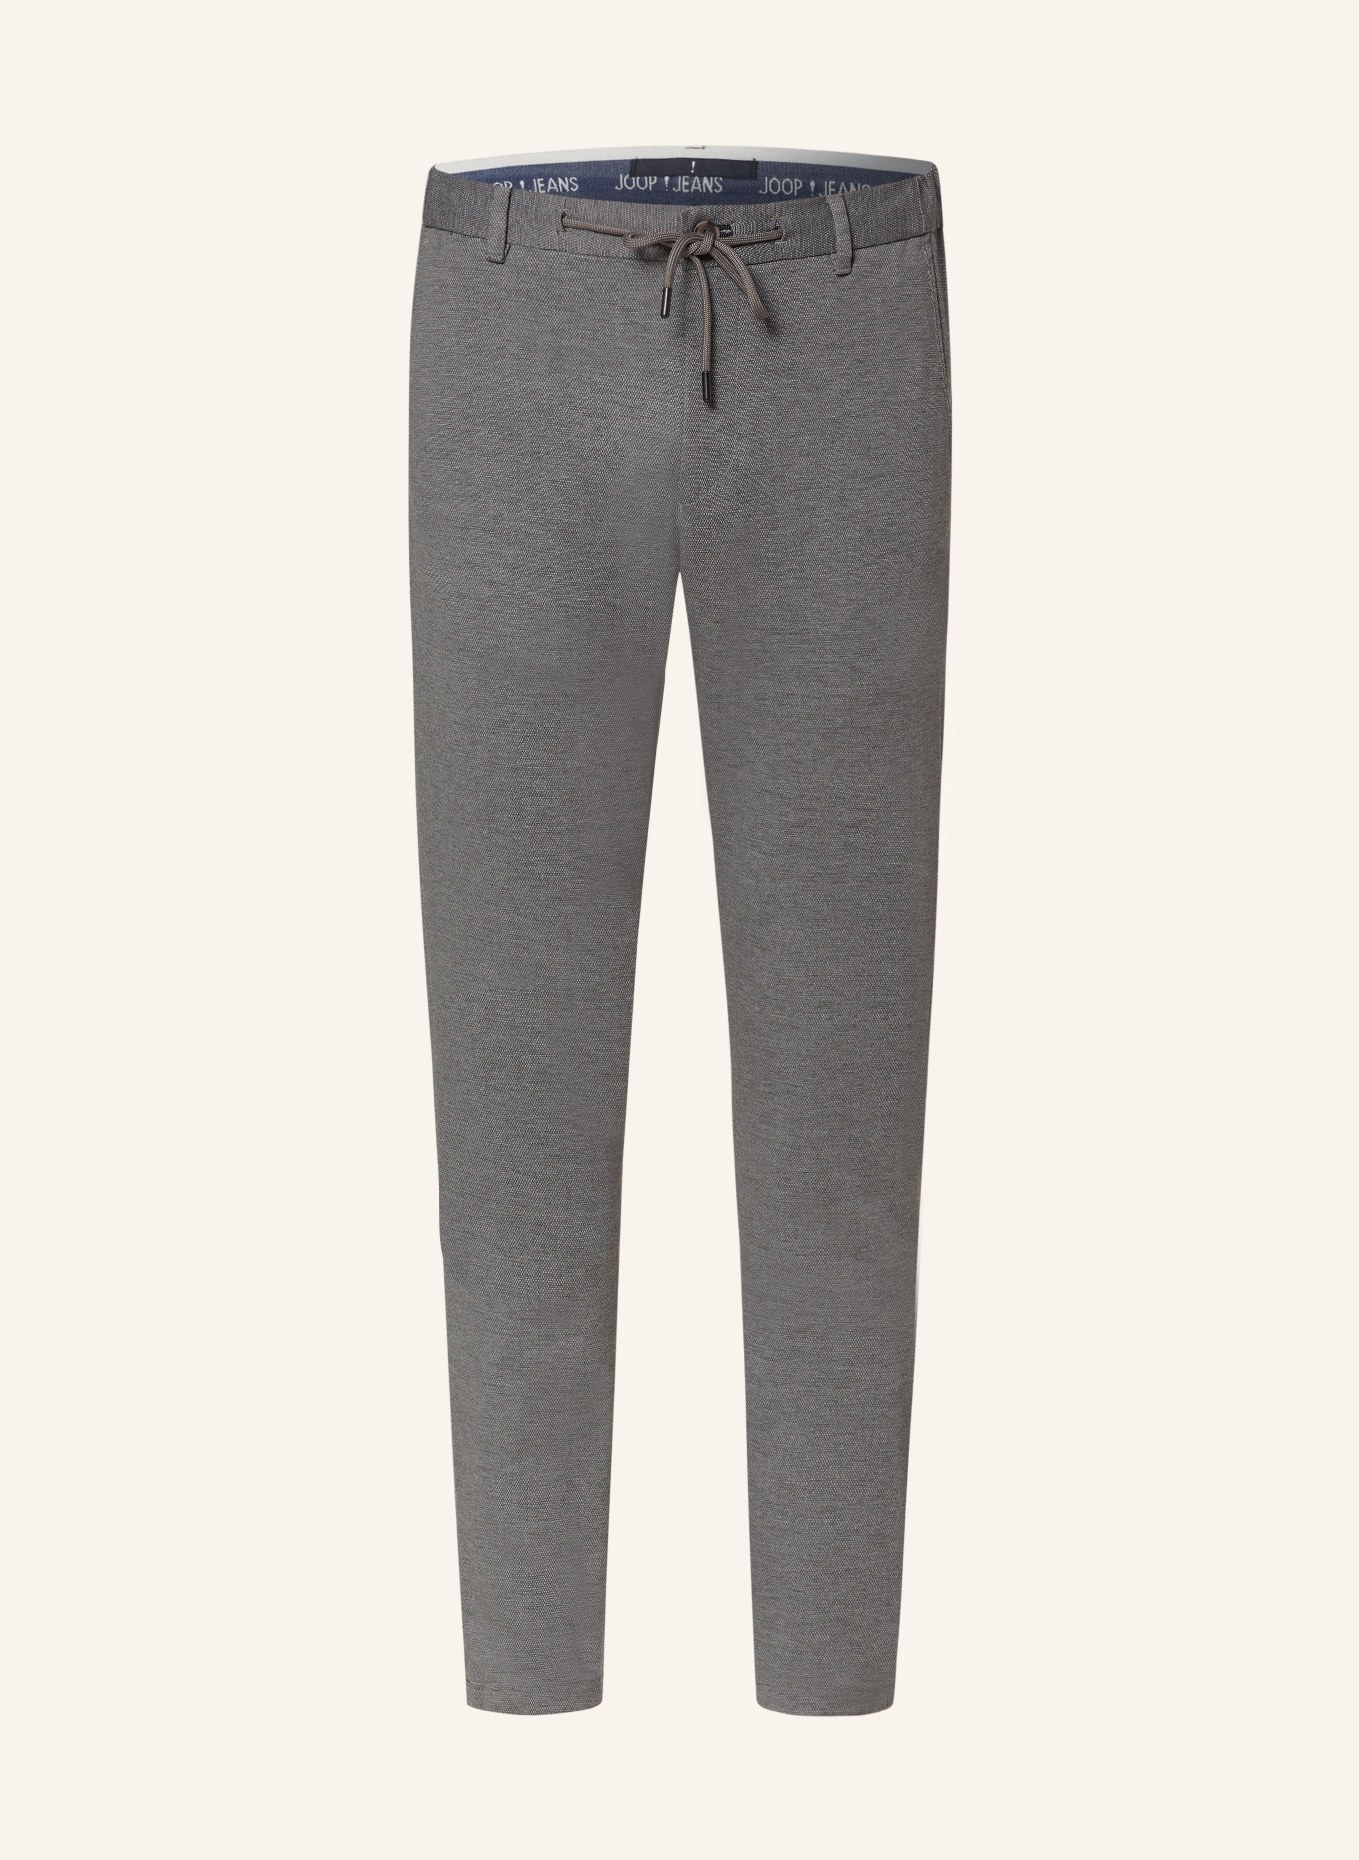 JOOP! JEANS Trousers MAXTON in jogger style modern fit, Color: GRAY (Image 1)